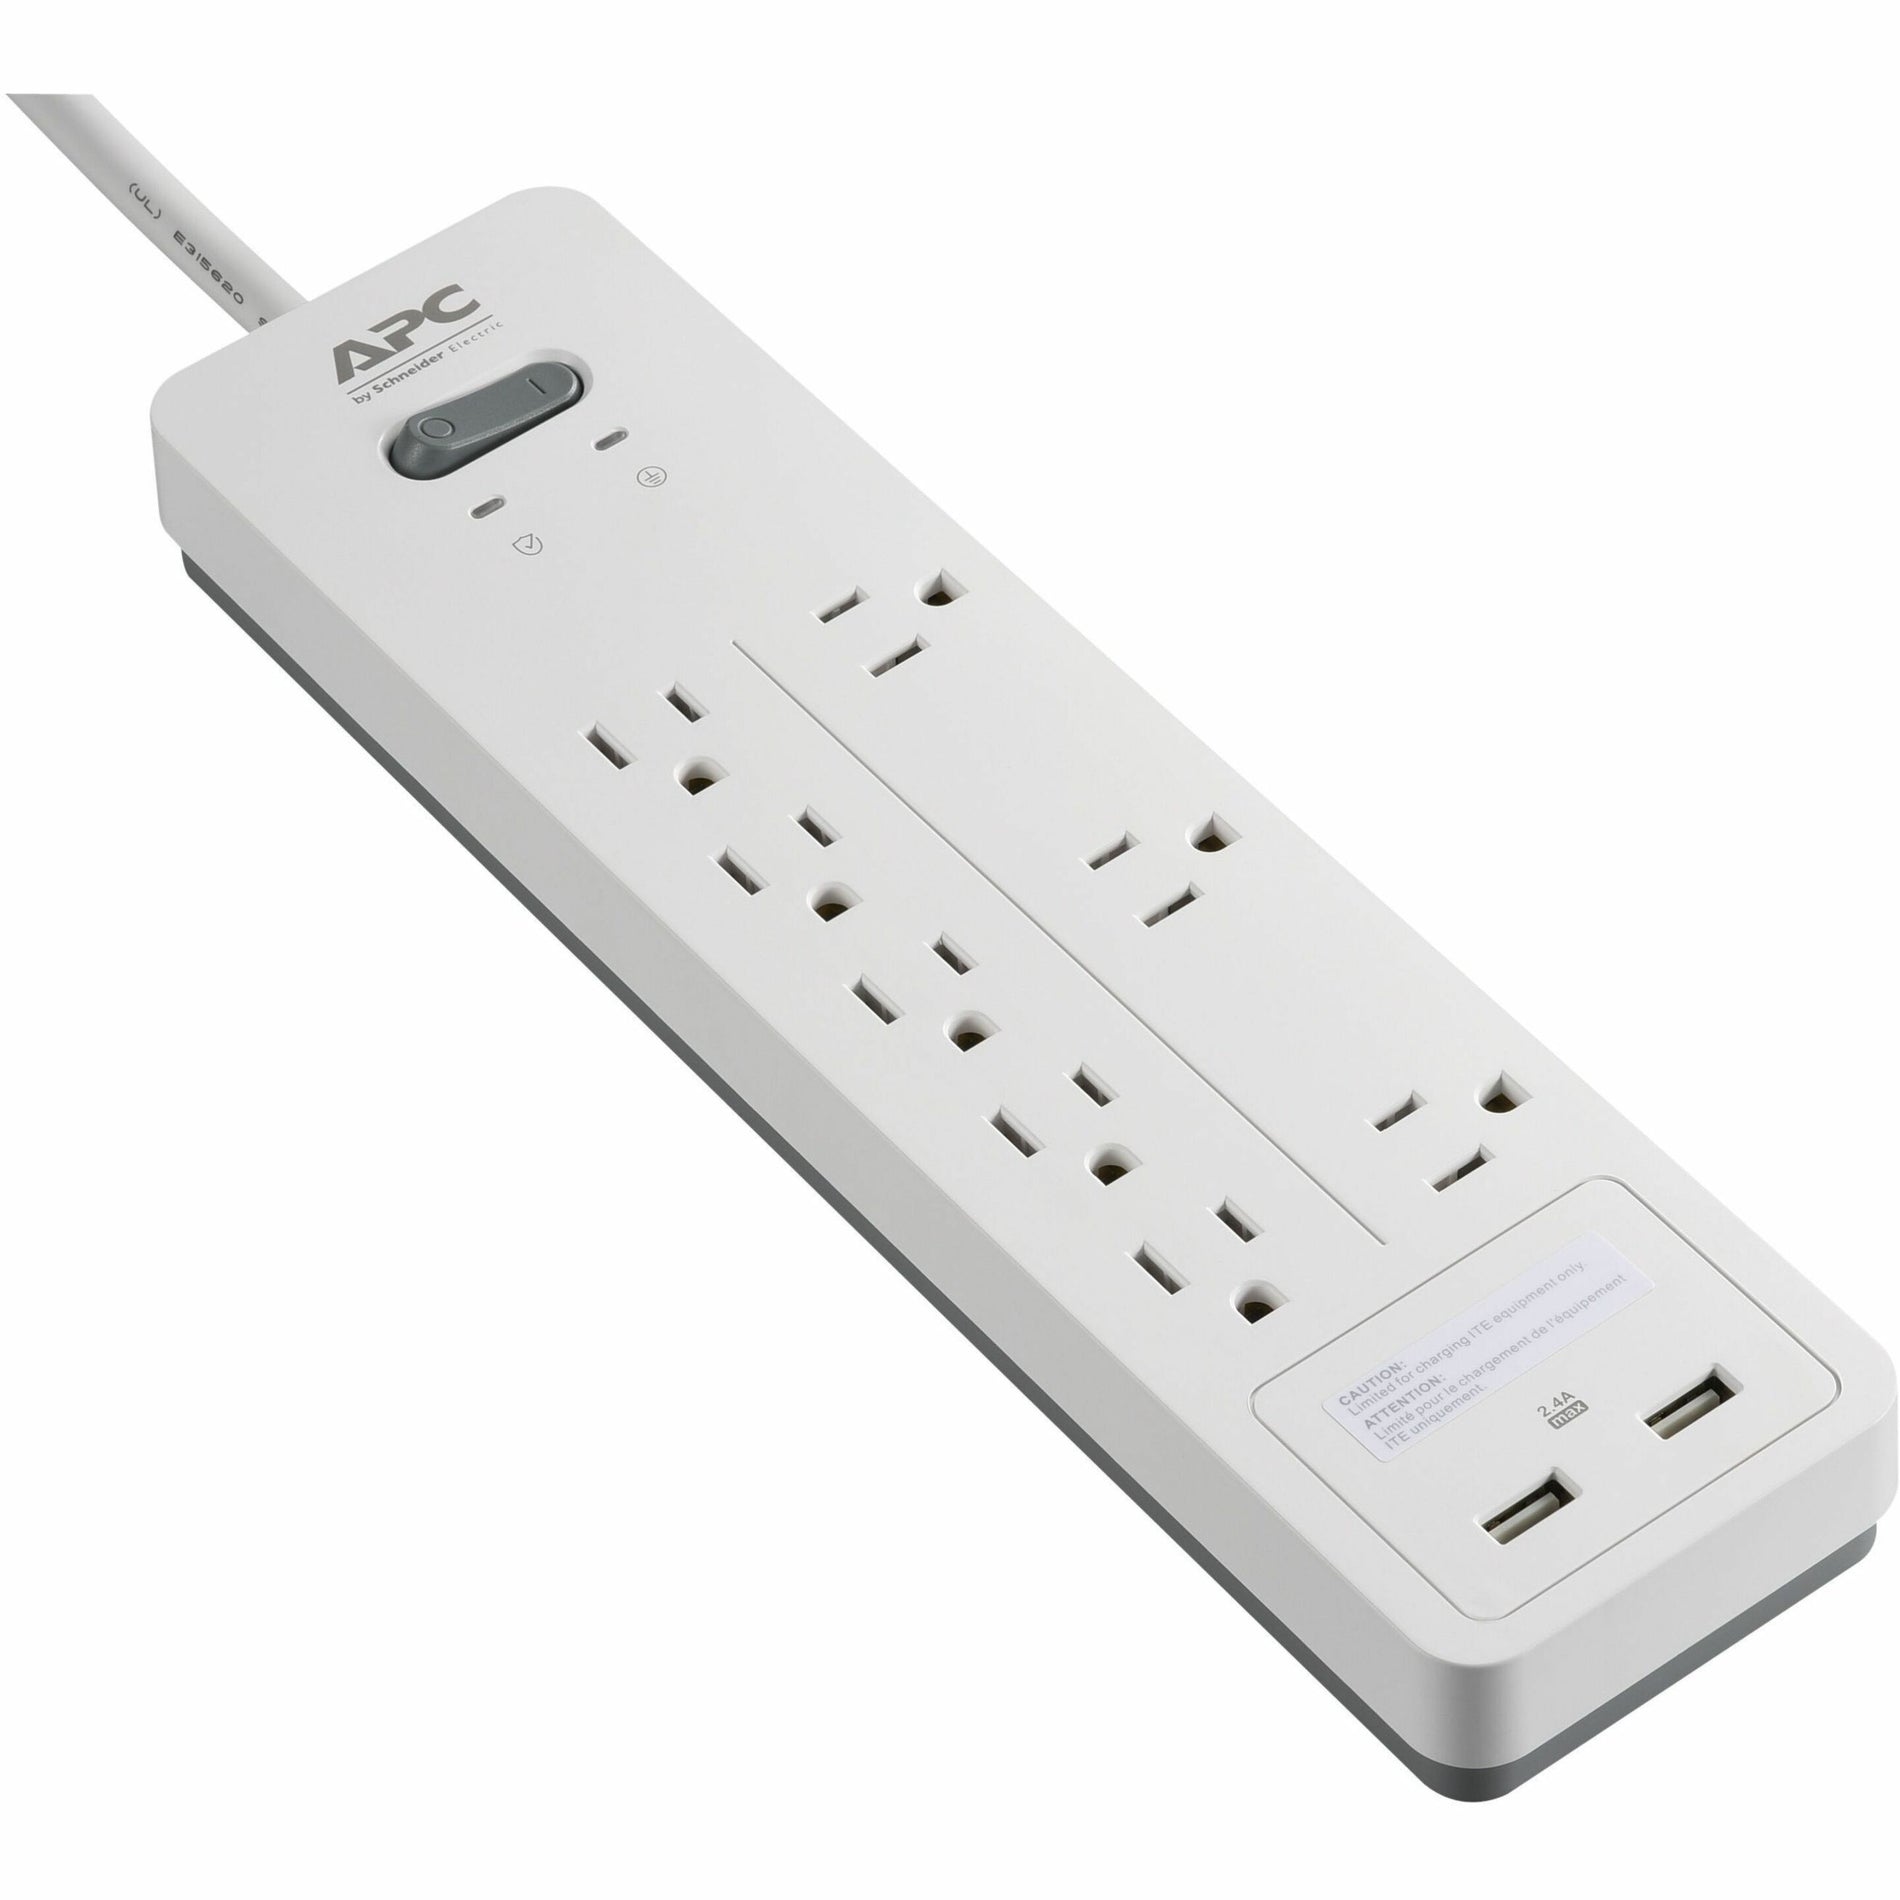 APC PH8U2W SurgeArrest Home/Office 8-Outlet Surge Suppressor/Protector, 2160 J, 2 USB Charging Ports, 120V White [Discontinued]